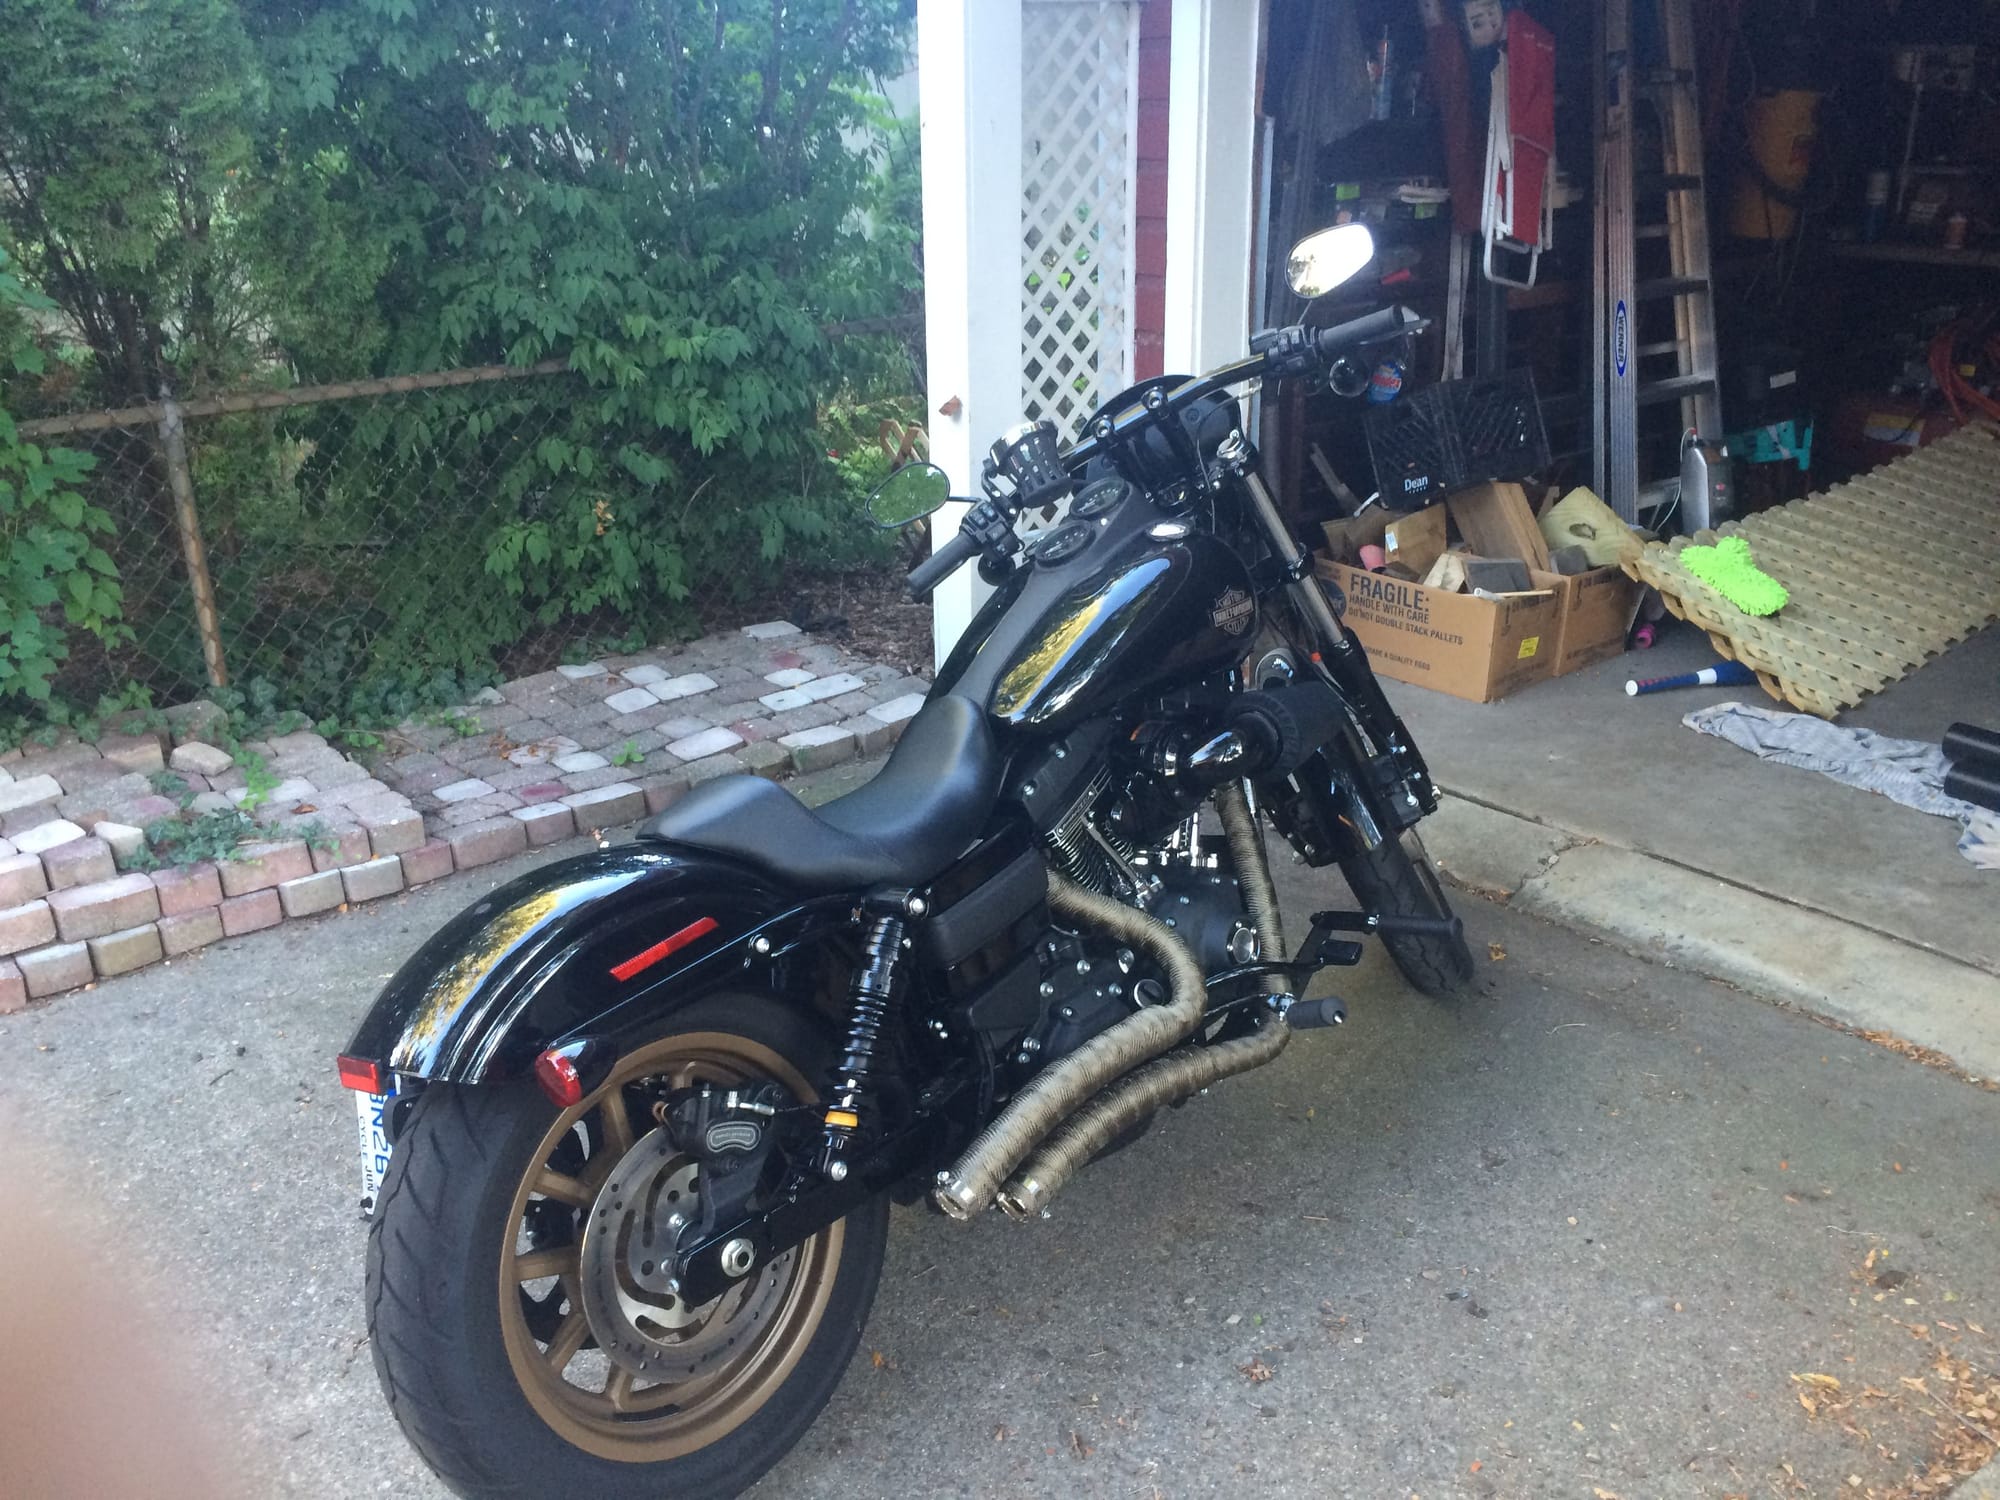 Low Rider S Exhaust replacment ? - Harley Davidson Forums